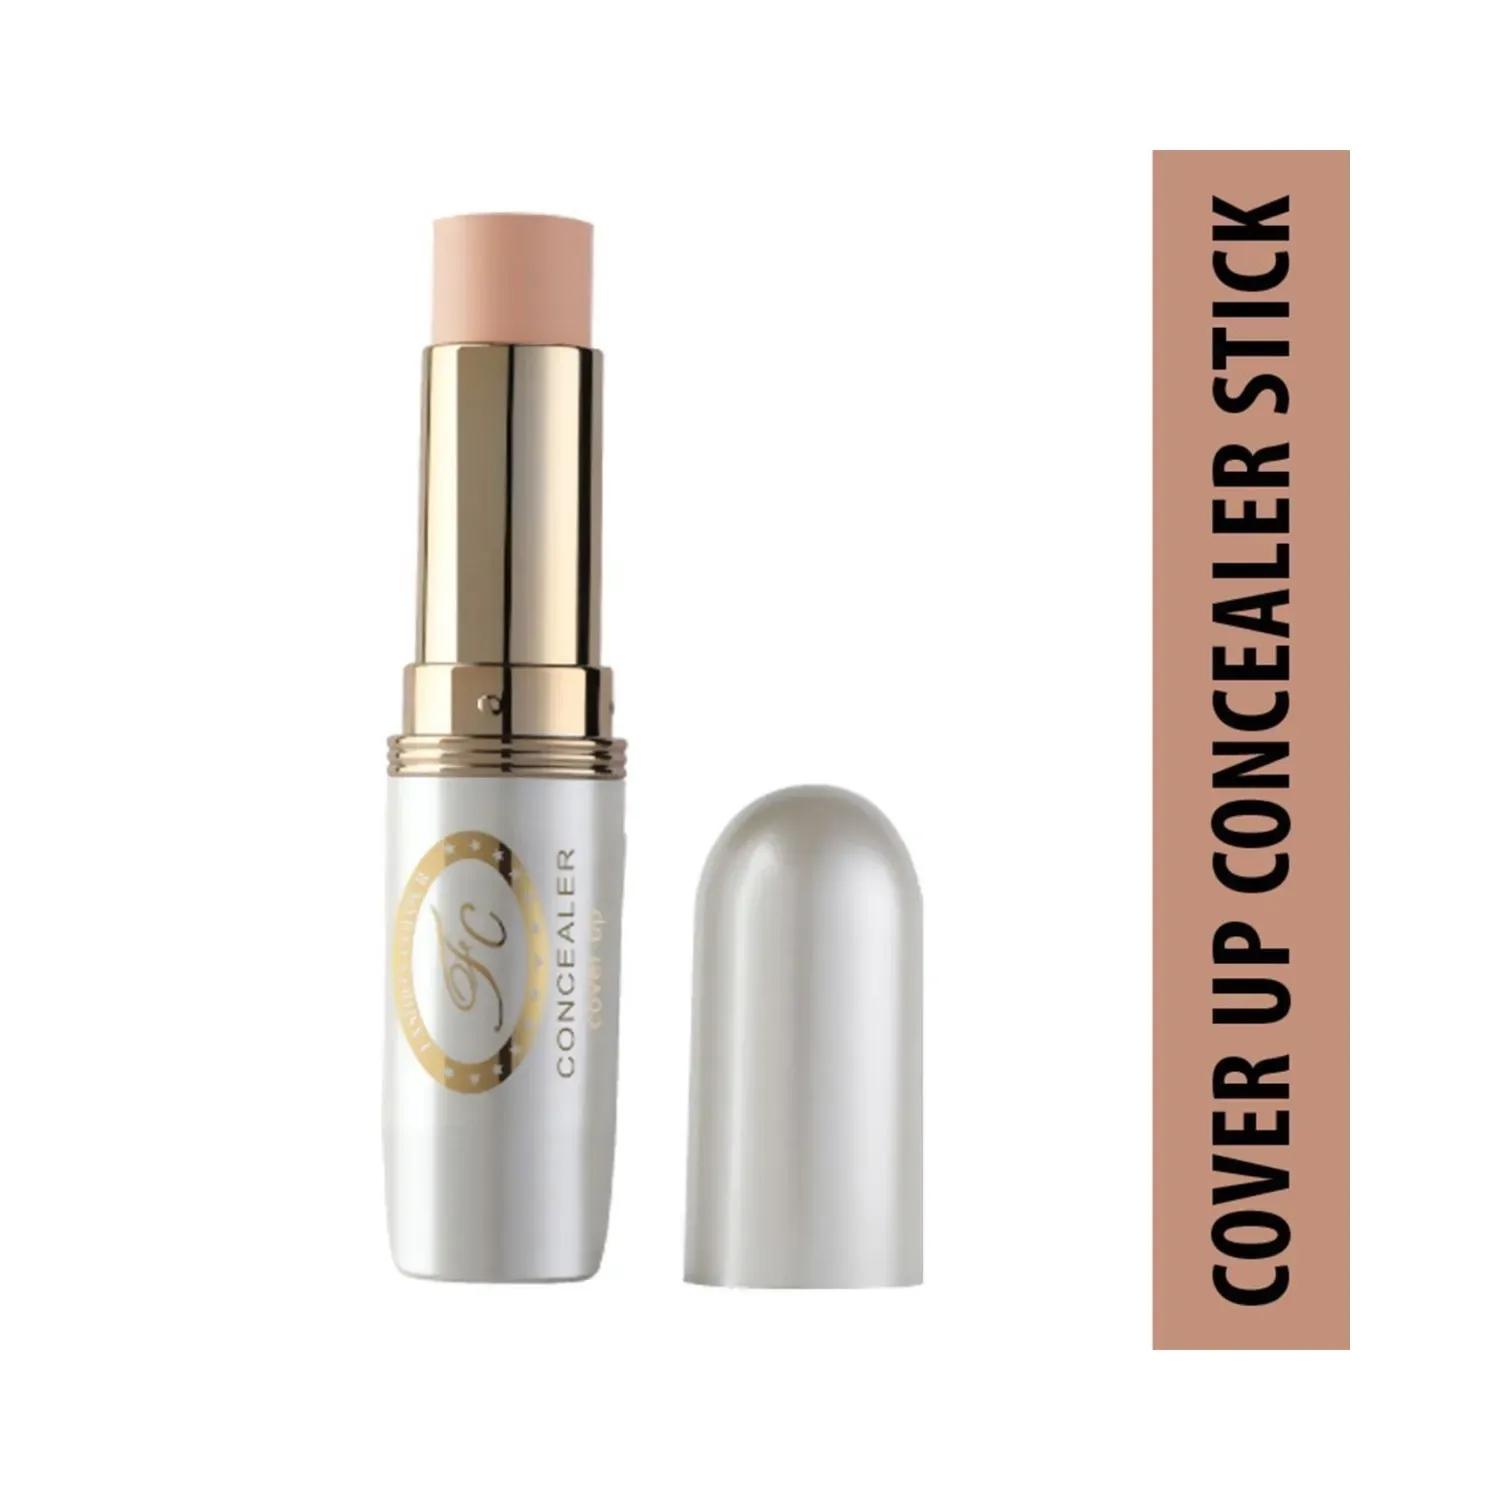 fashion colour cover up concealer stick - 03 shade (10g)